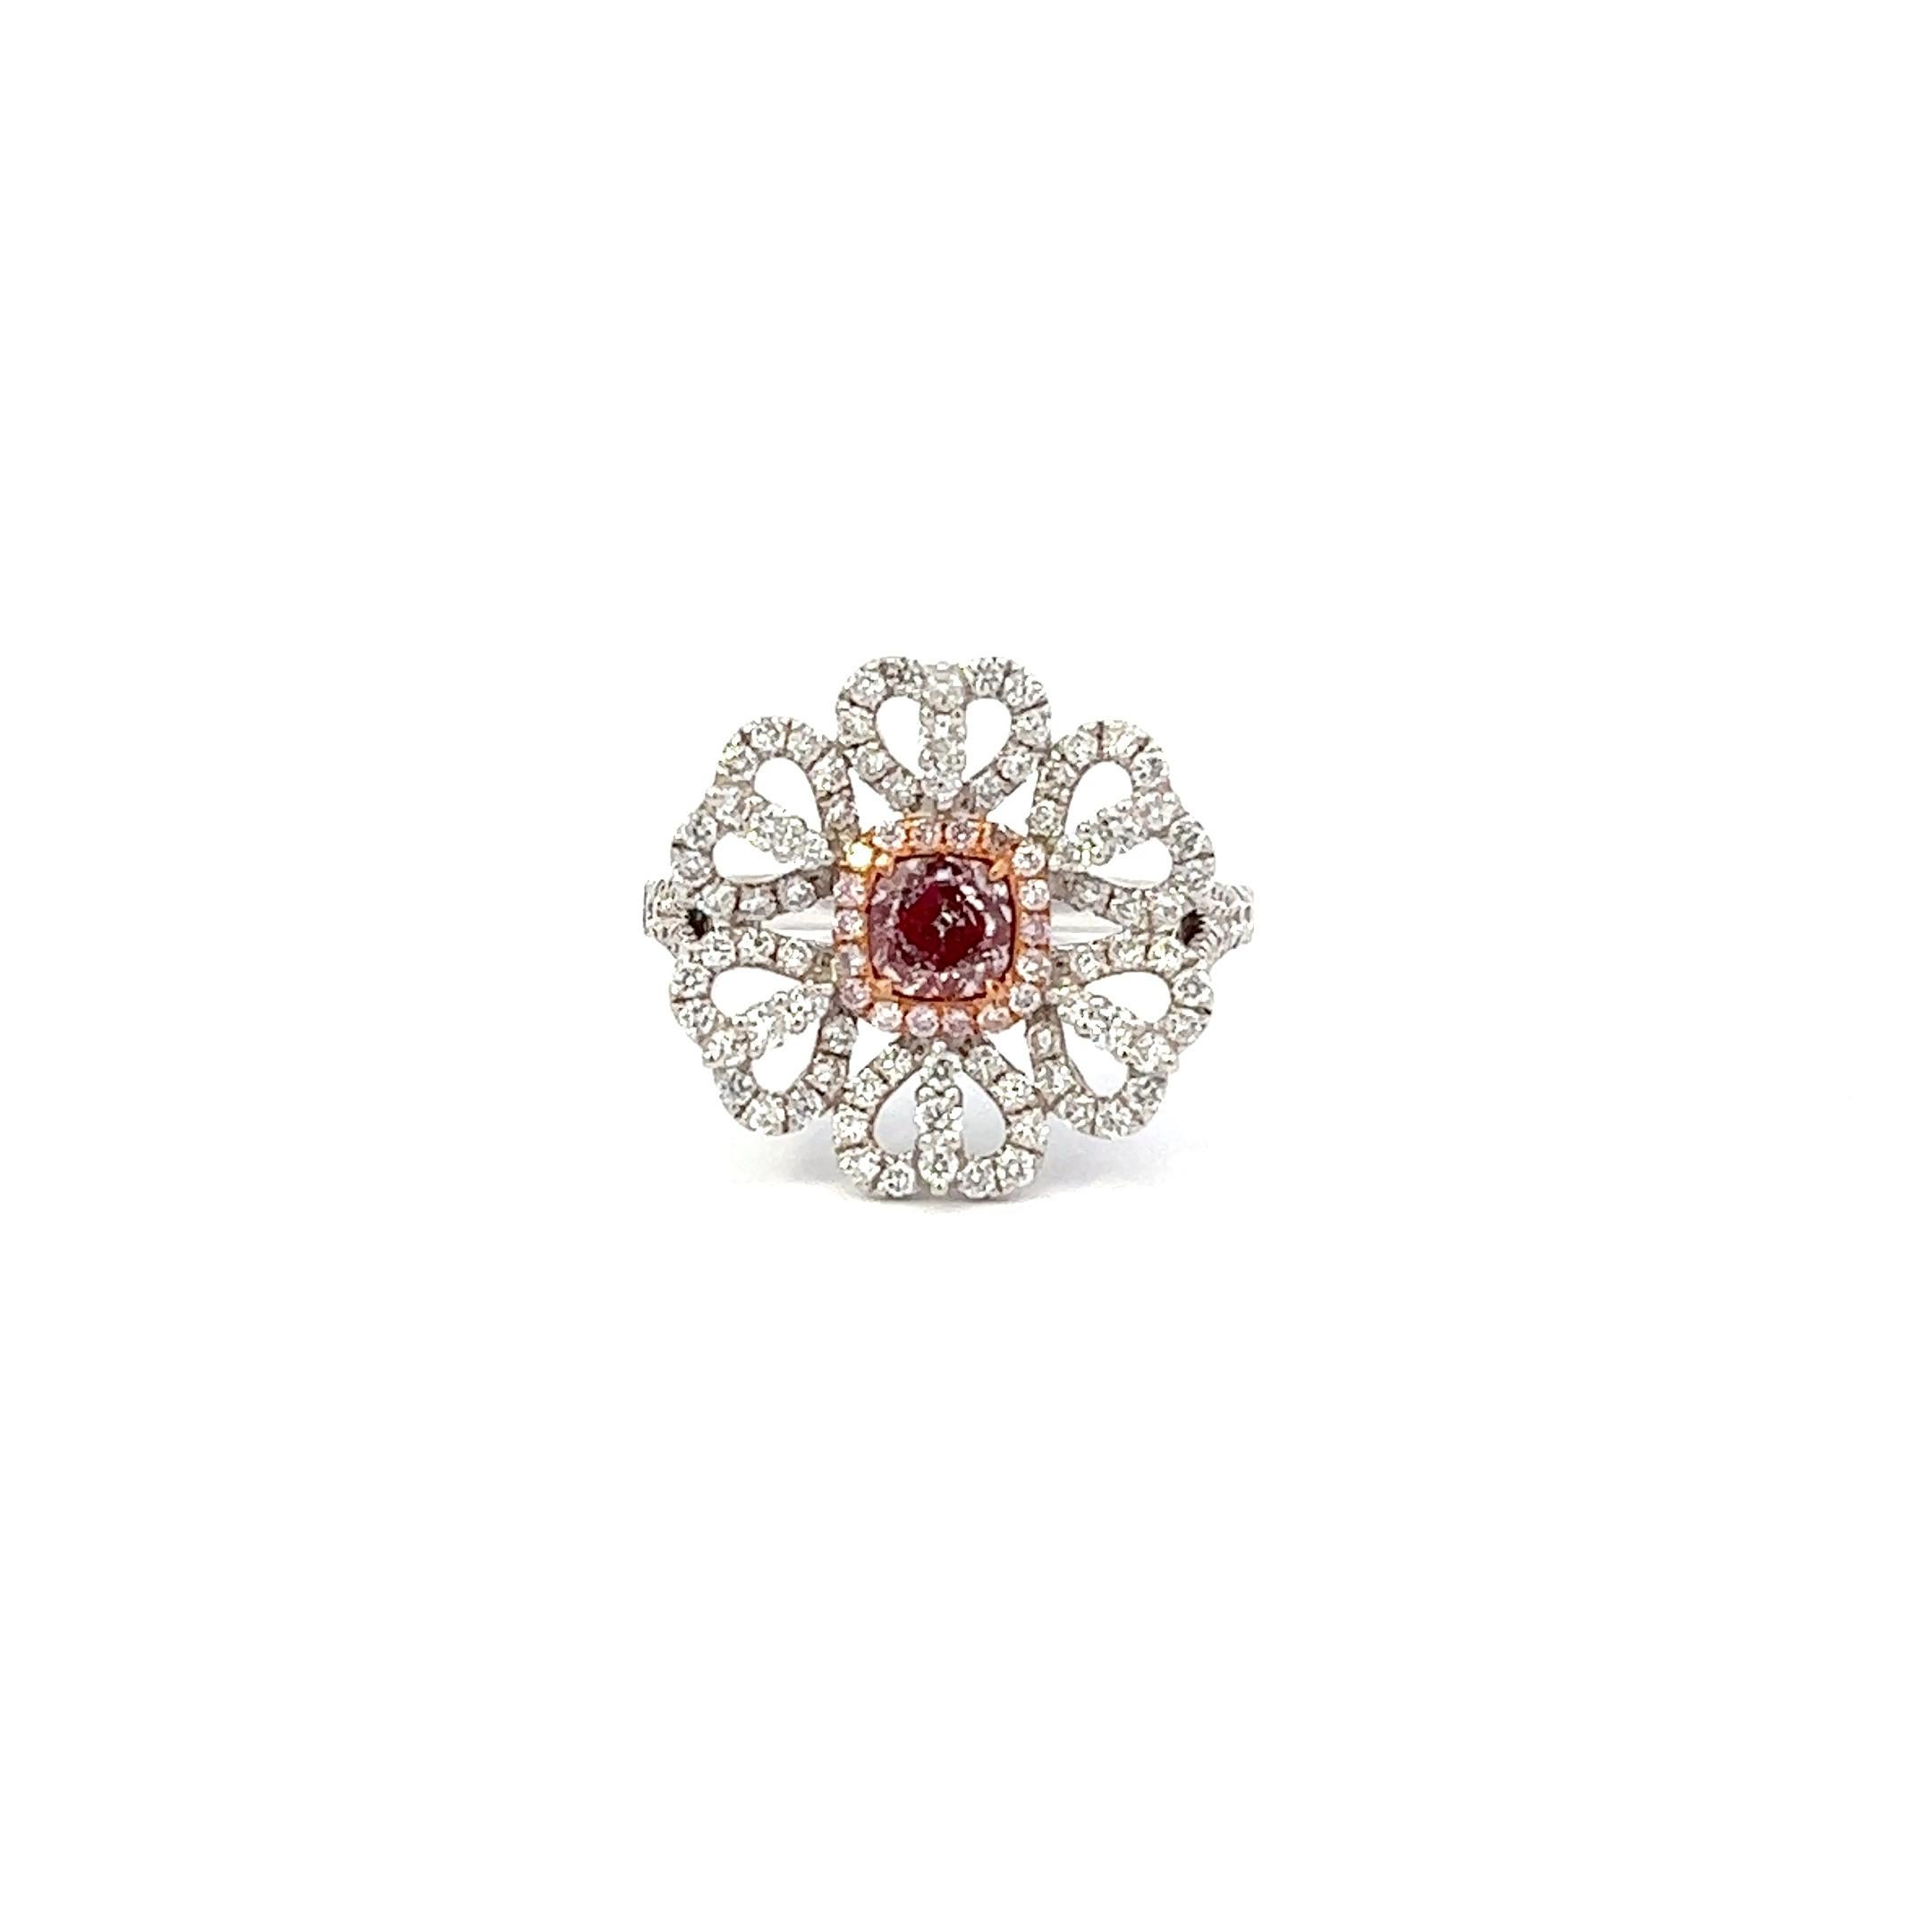 Center: 0.51ct Light Pinkish Brown Cushion VS1 GIA# 6342124939
Setting: 18k White Gold 0.81ct Pink and White Diamond Ring

An extremely rare and stunning natural pink diamond center. Pink Diamonds account for less than 0.01% of all diamonds mined in